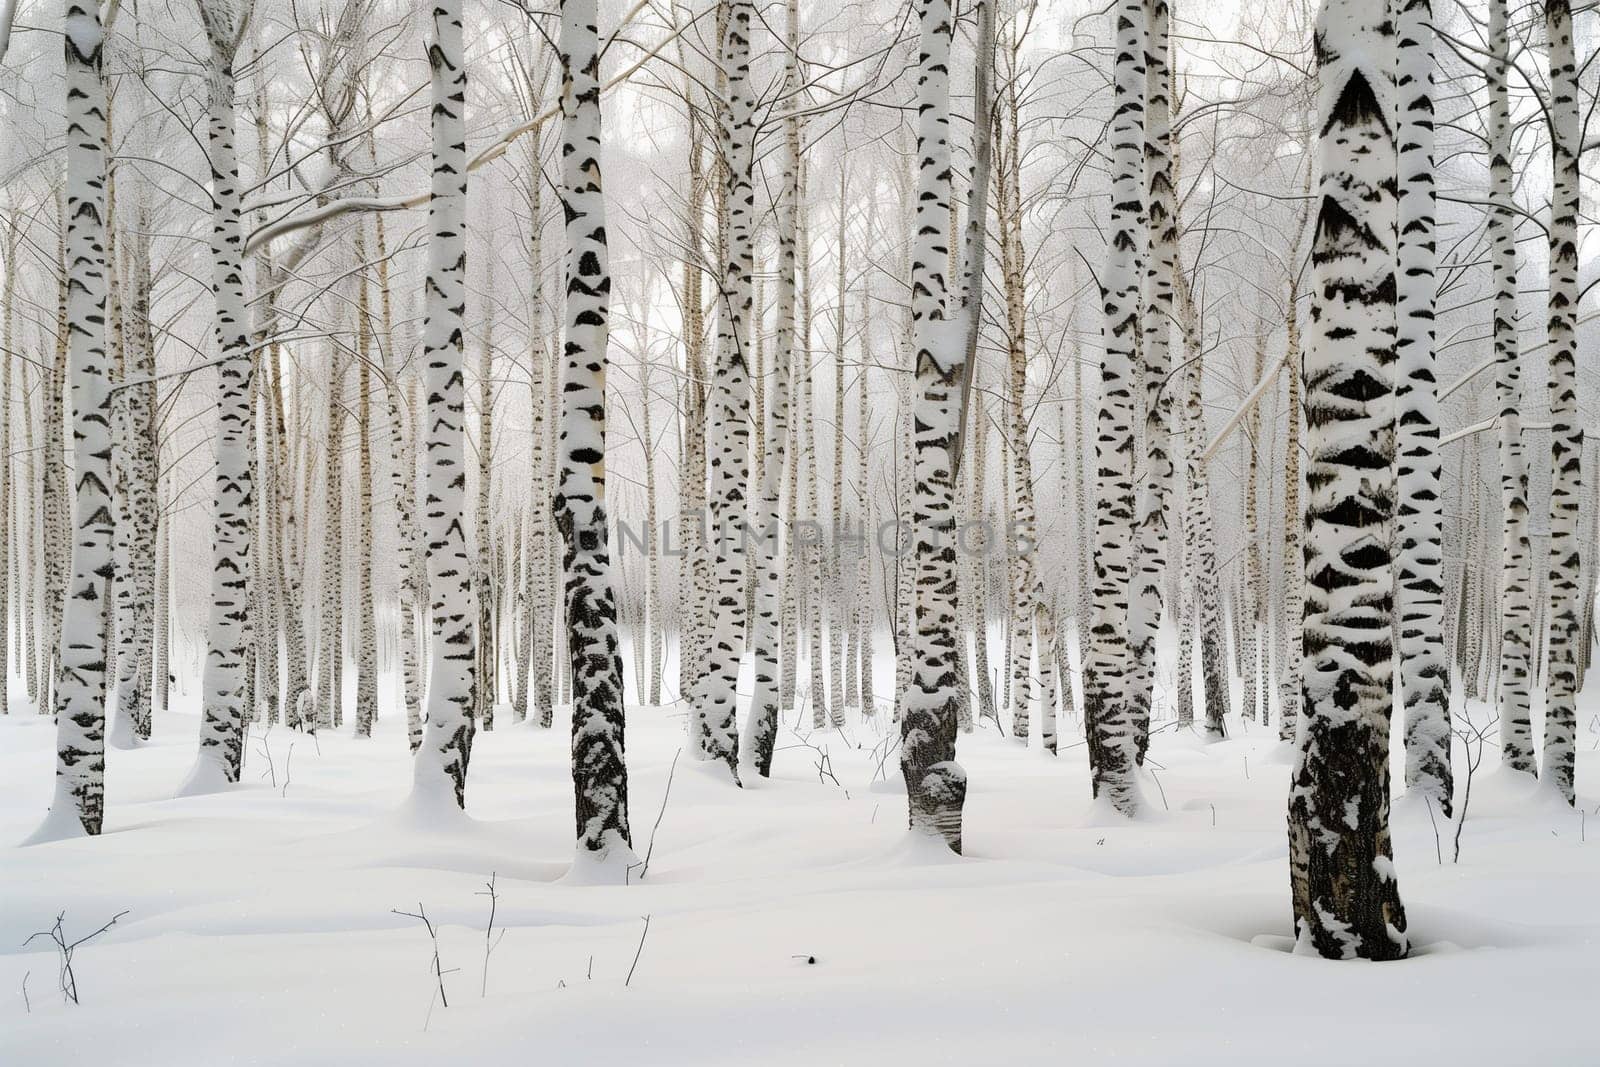 Step into a serene winter landscape featuring a dense grove of slender birch trees. Their white bark, marked with black patterns, stands in stark contrast to the pristine snow blanketing the ground. The uniform trunks create a rhythmic pattern, evoking a sense of calm and tranquility. This image captures the quiet beauty of nature in winter, highlighting the elegance of birch trees against a snowy backdrop.